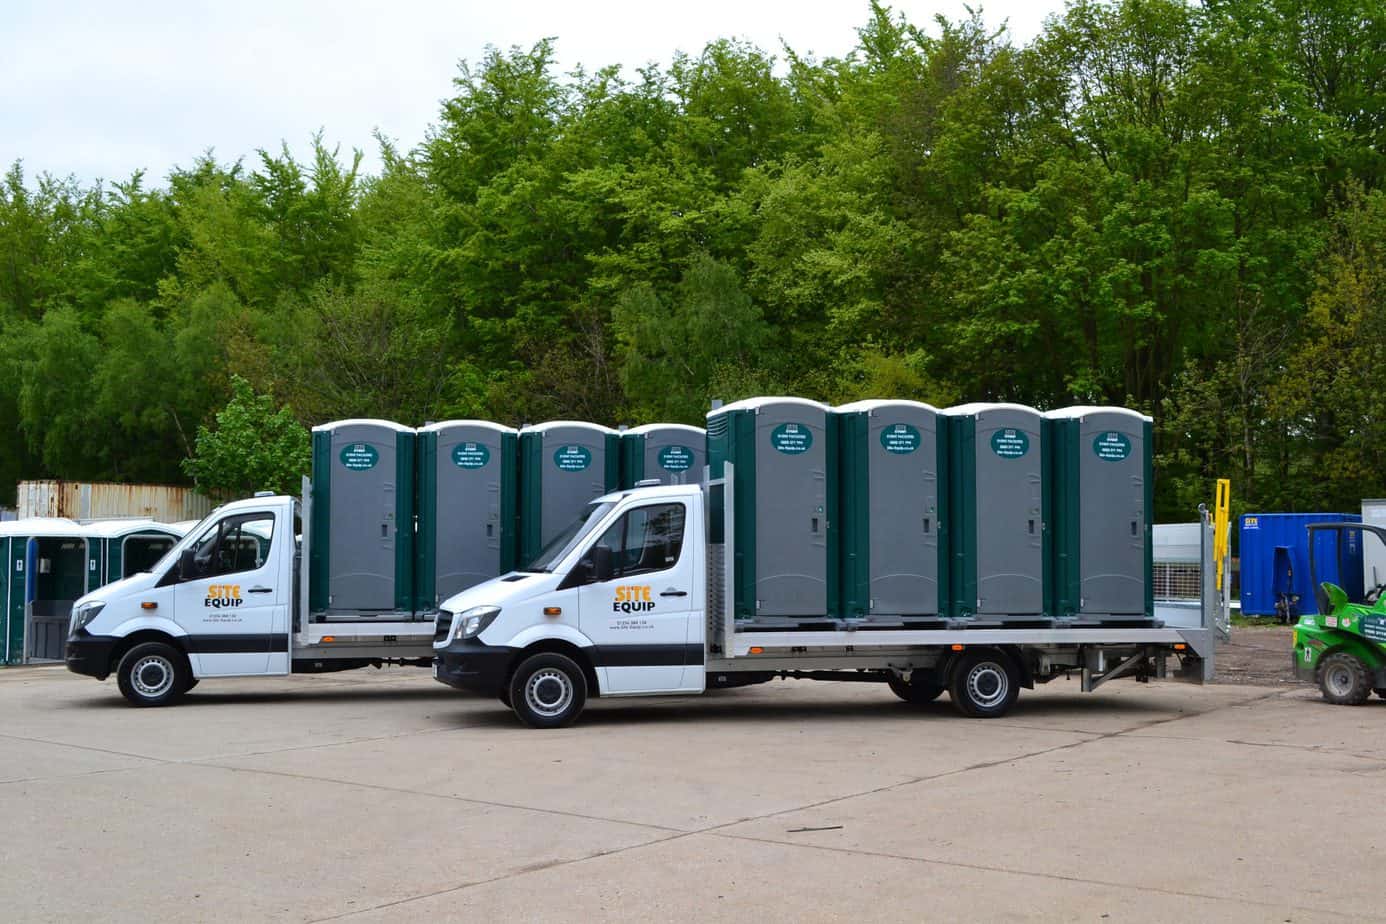 Delivery of toilets